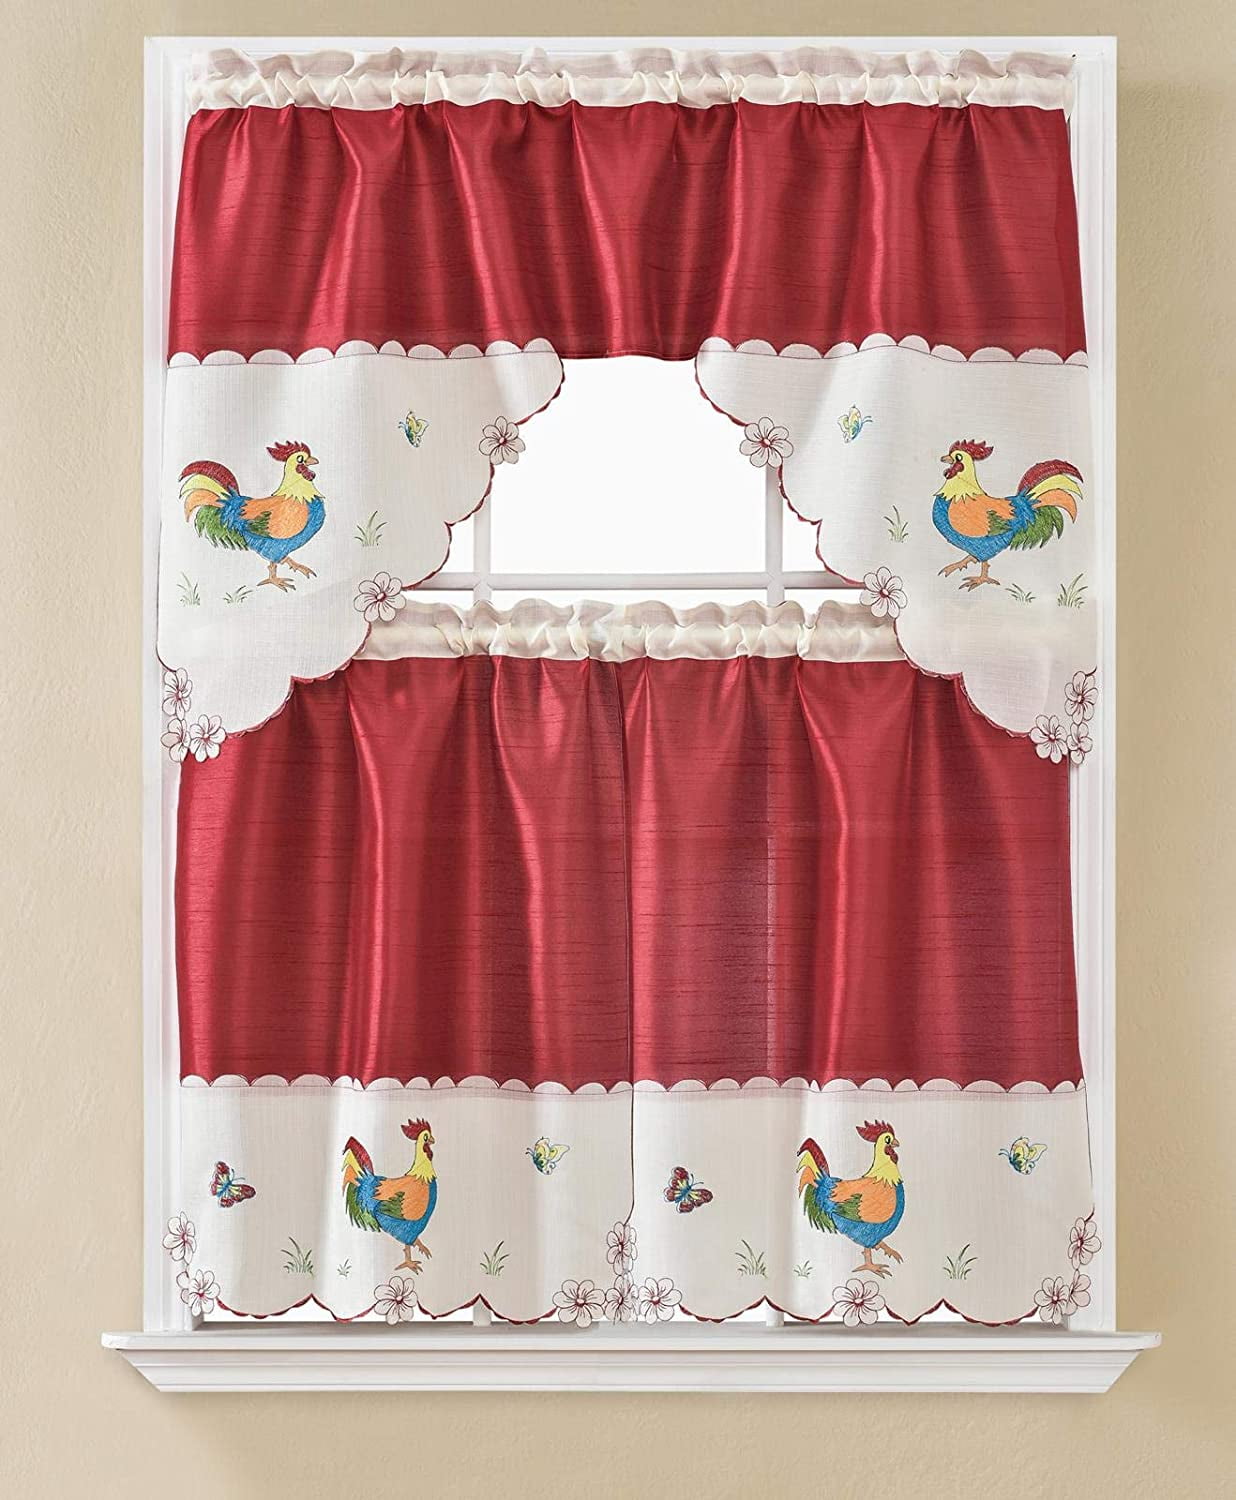 3 PC Kitchen Curtain Swag Set Fruit Floral Rooster Printed Design Window Panels 